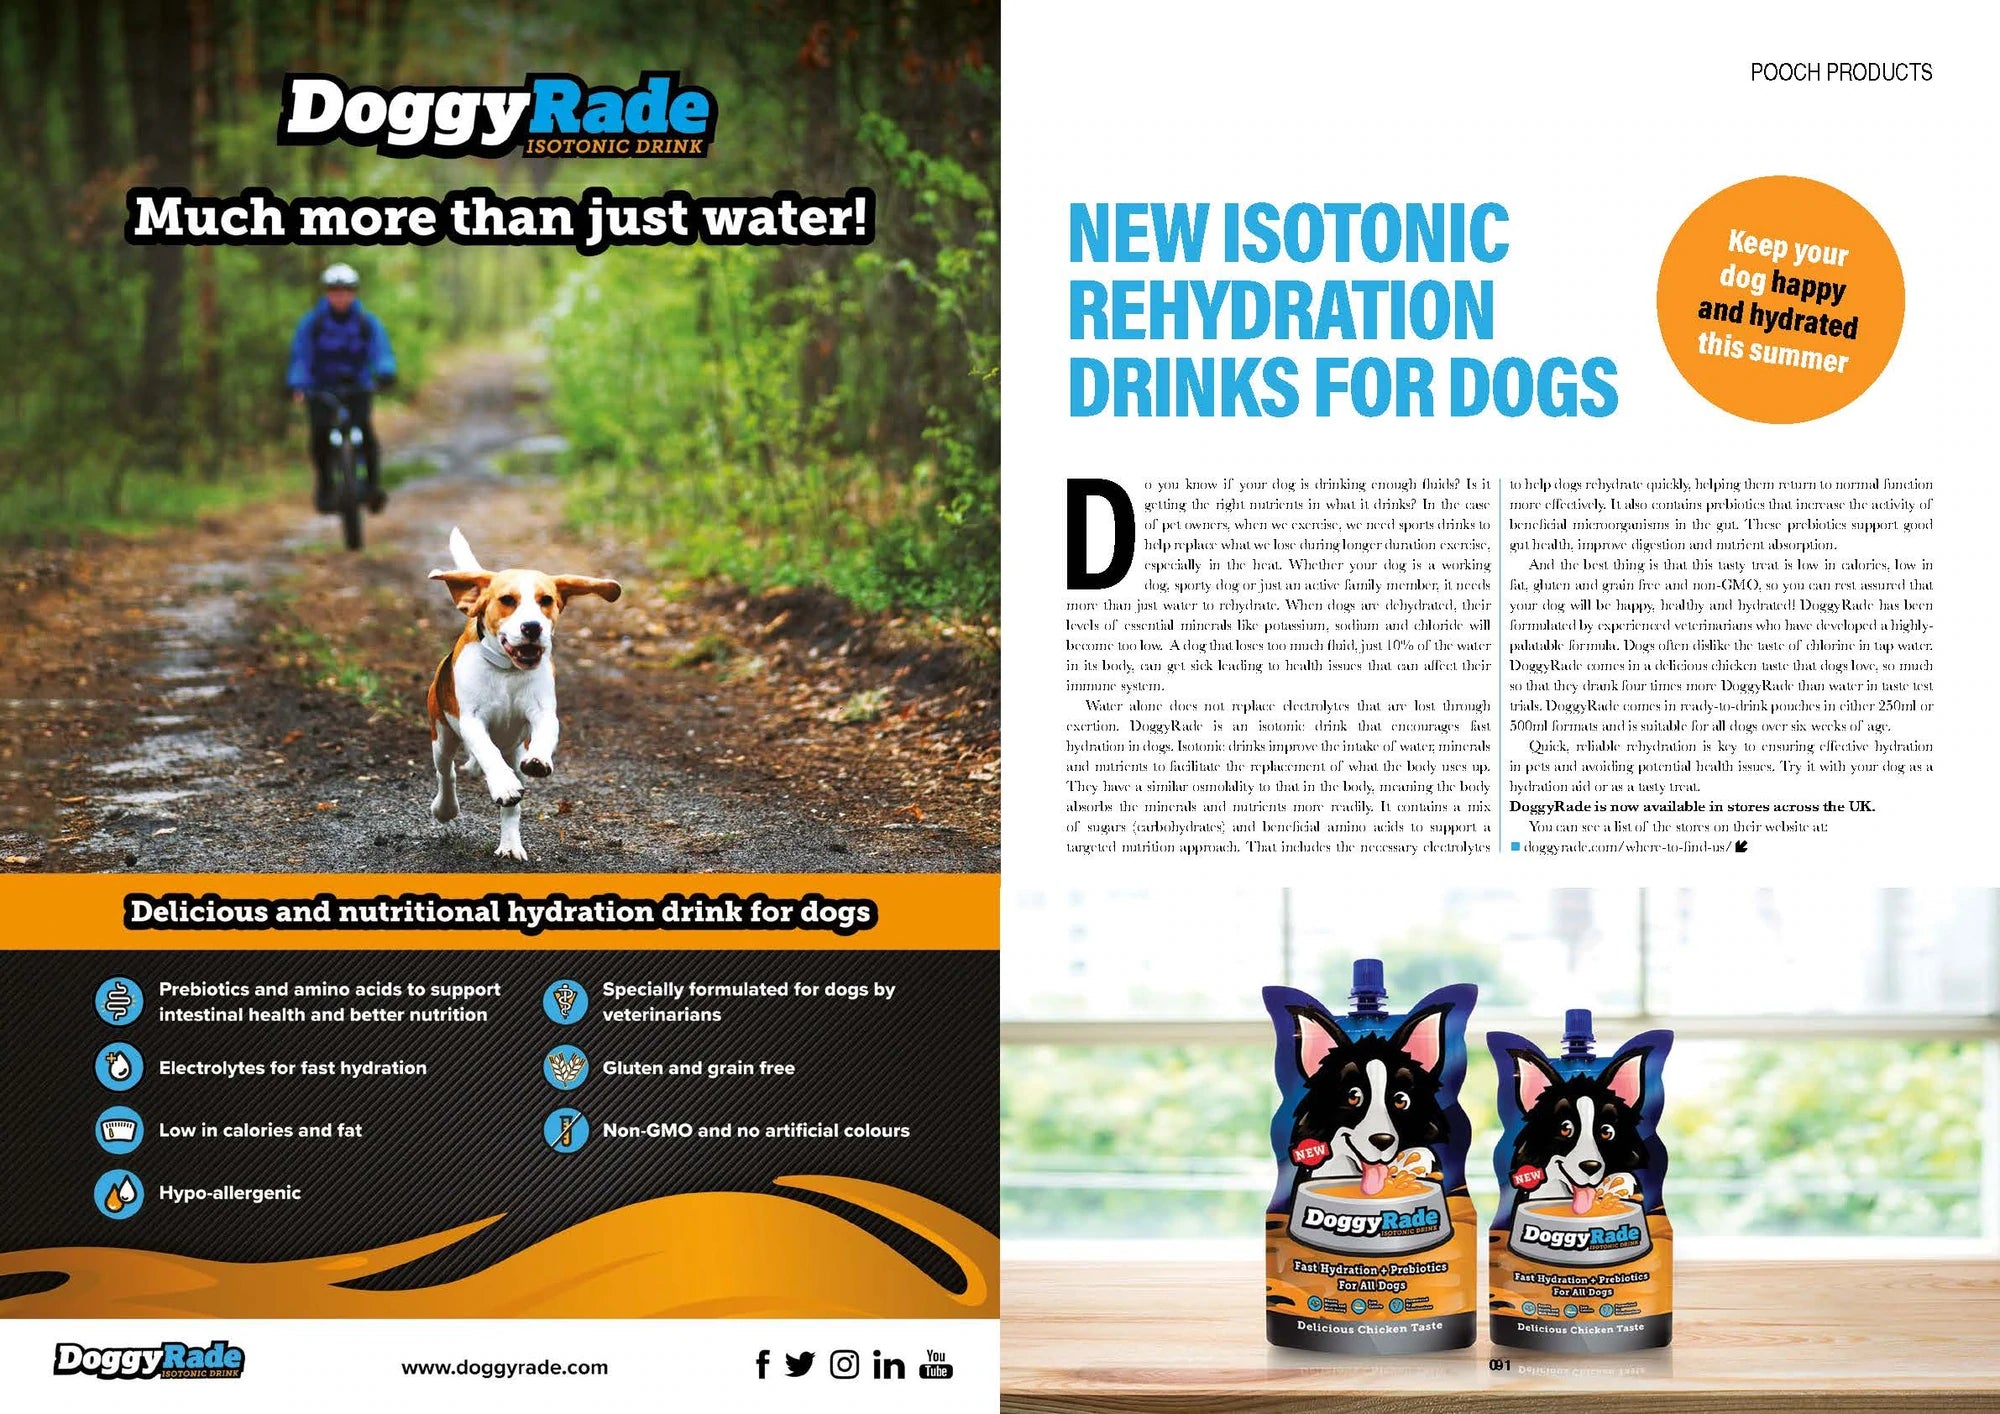 Edition Dog - Keep your dog happy and hydrated this summer